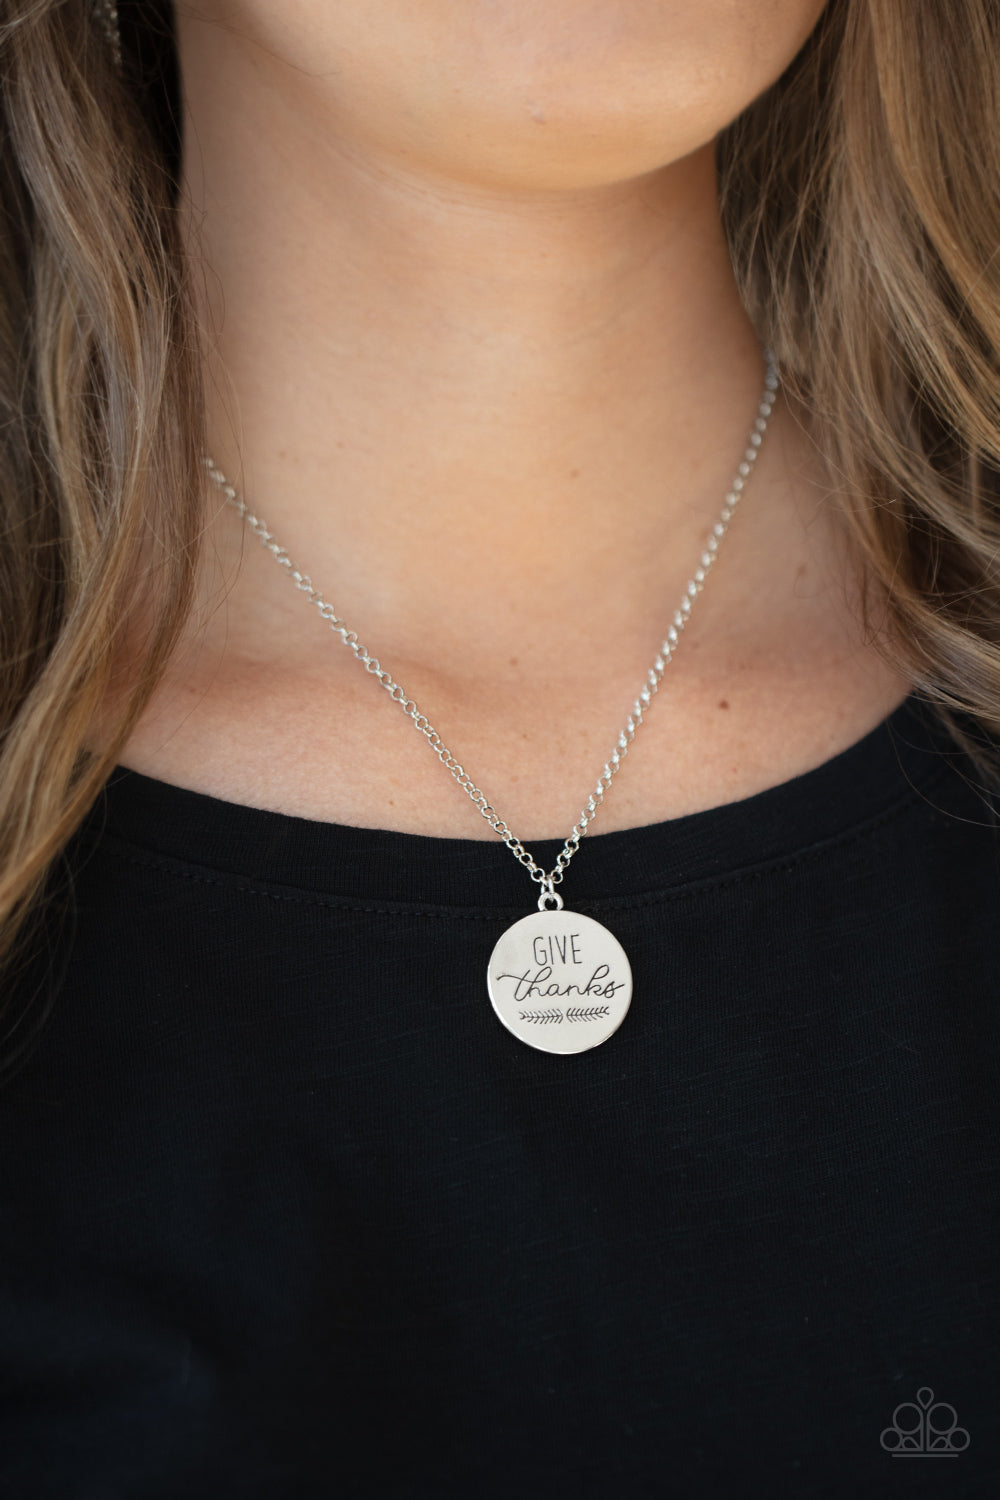 GIVE THANKS - SILVER INSPIRATIONAL NECKLACE